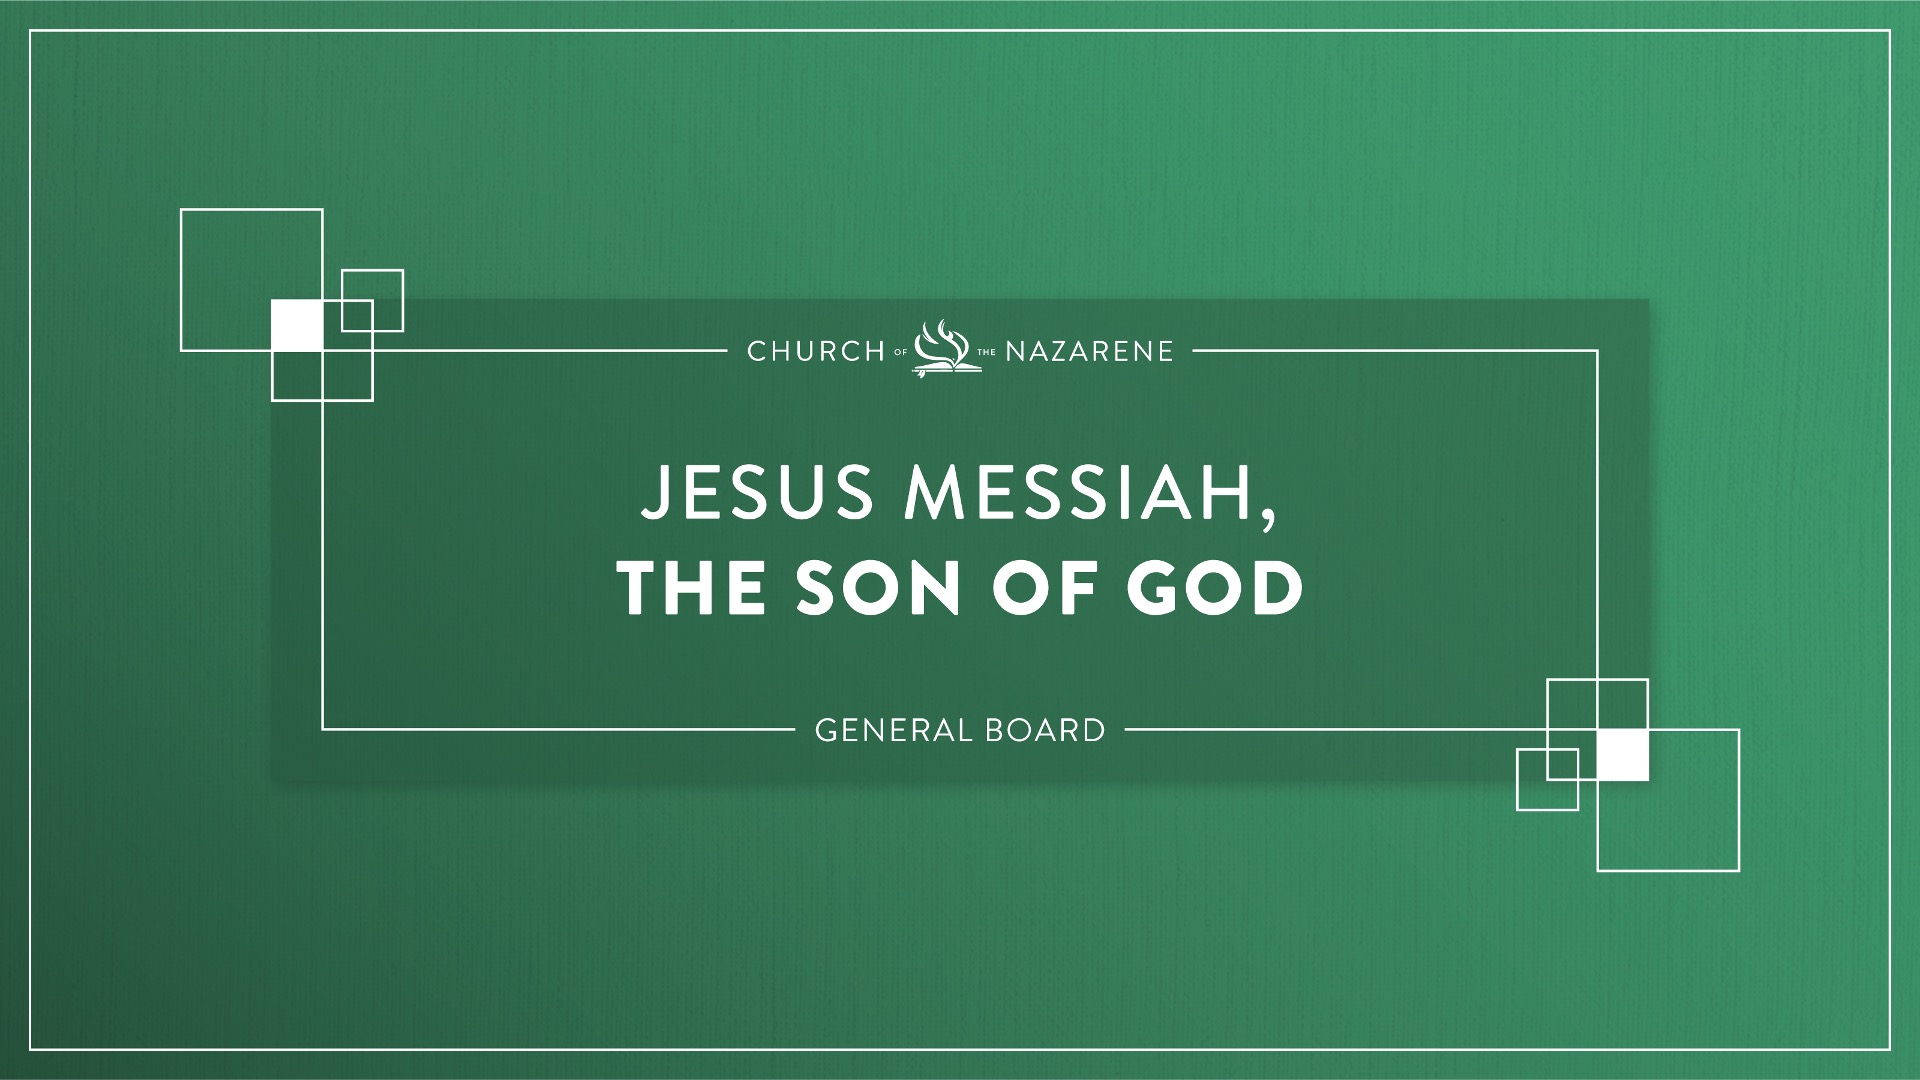 Jesus, the Messiah, the Son of God